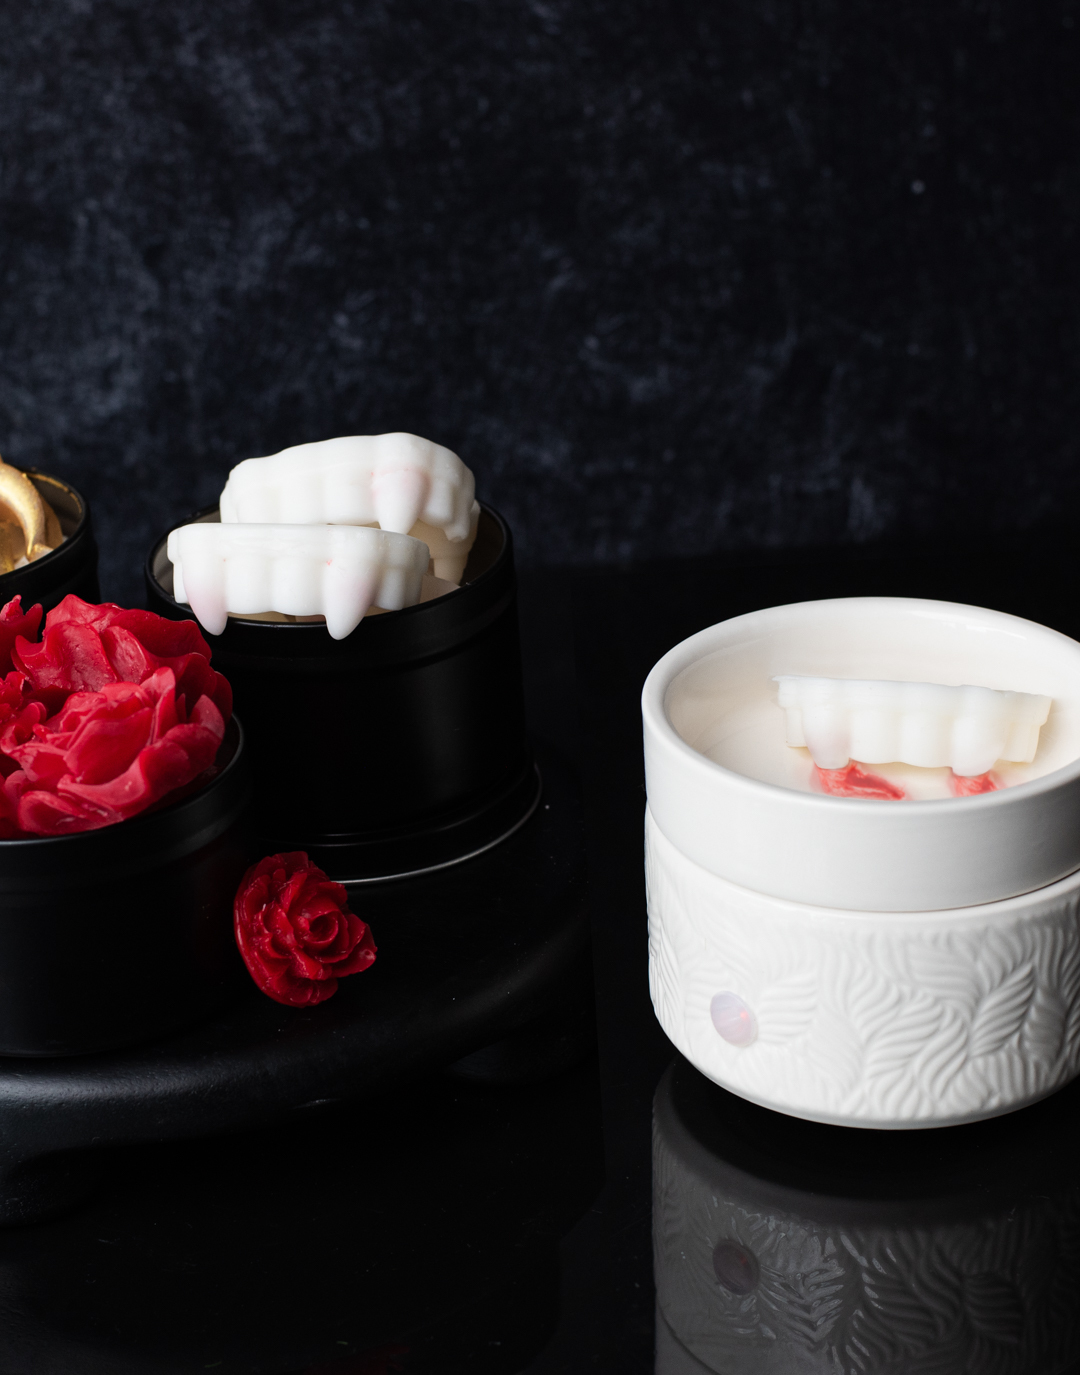 Wax melts in the shape or red roses and white vampire teeth. The vampire teeth reveal red mica swirls as they melt.